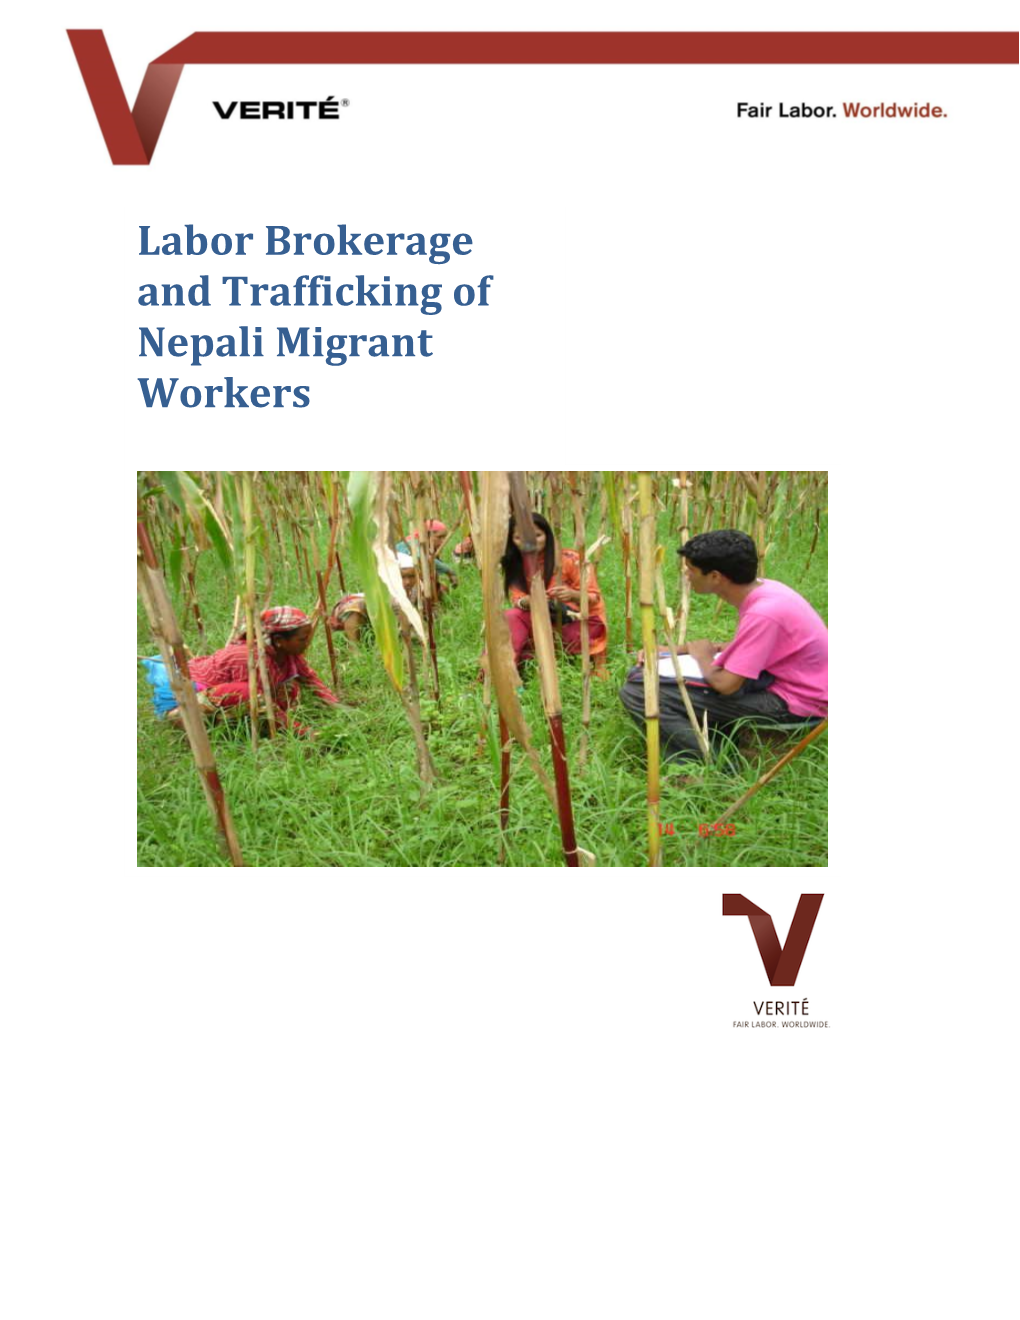 Labor Brokerage and Trafficking of Nepali Migrant Workers